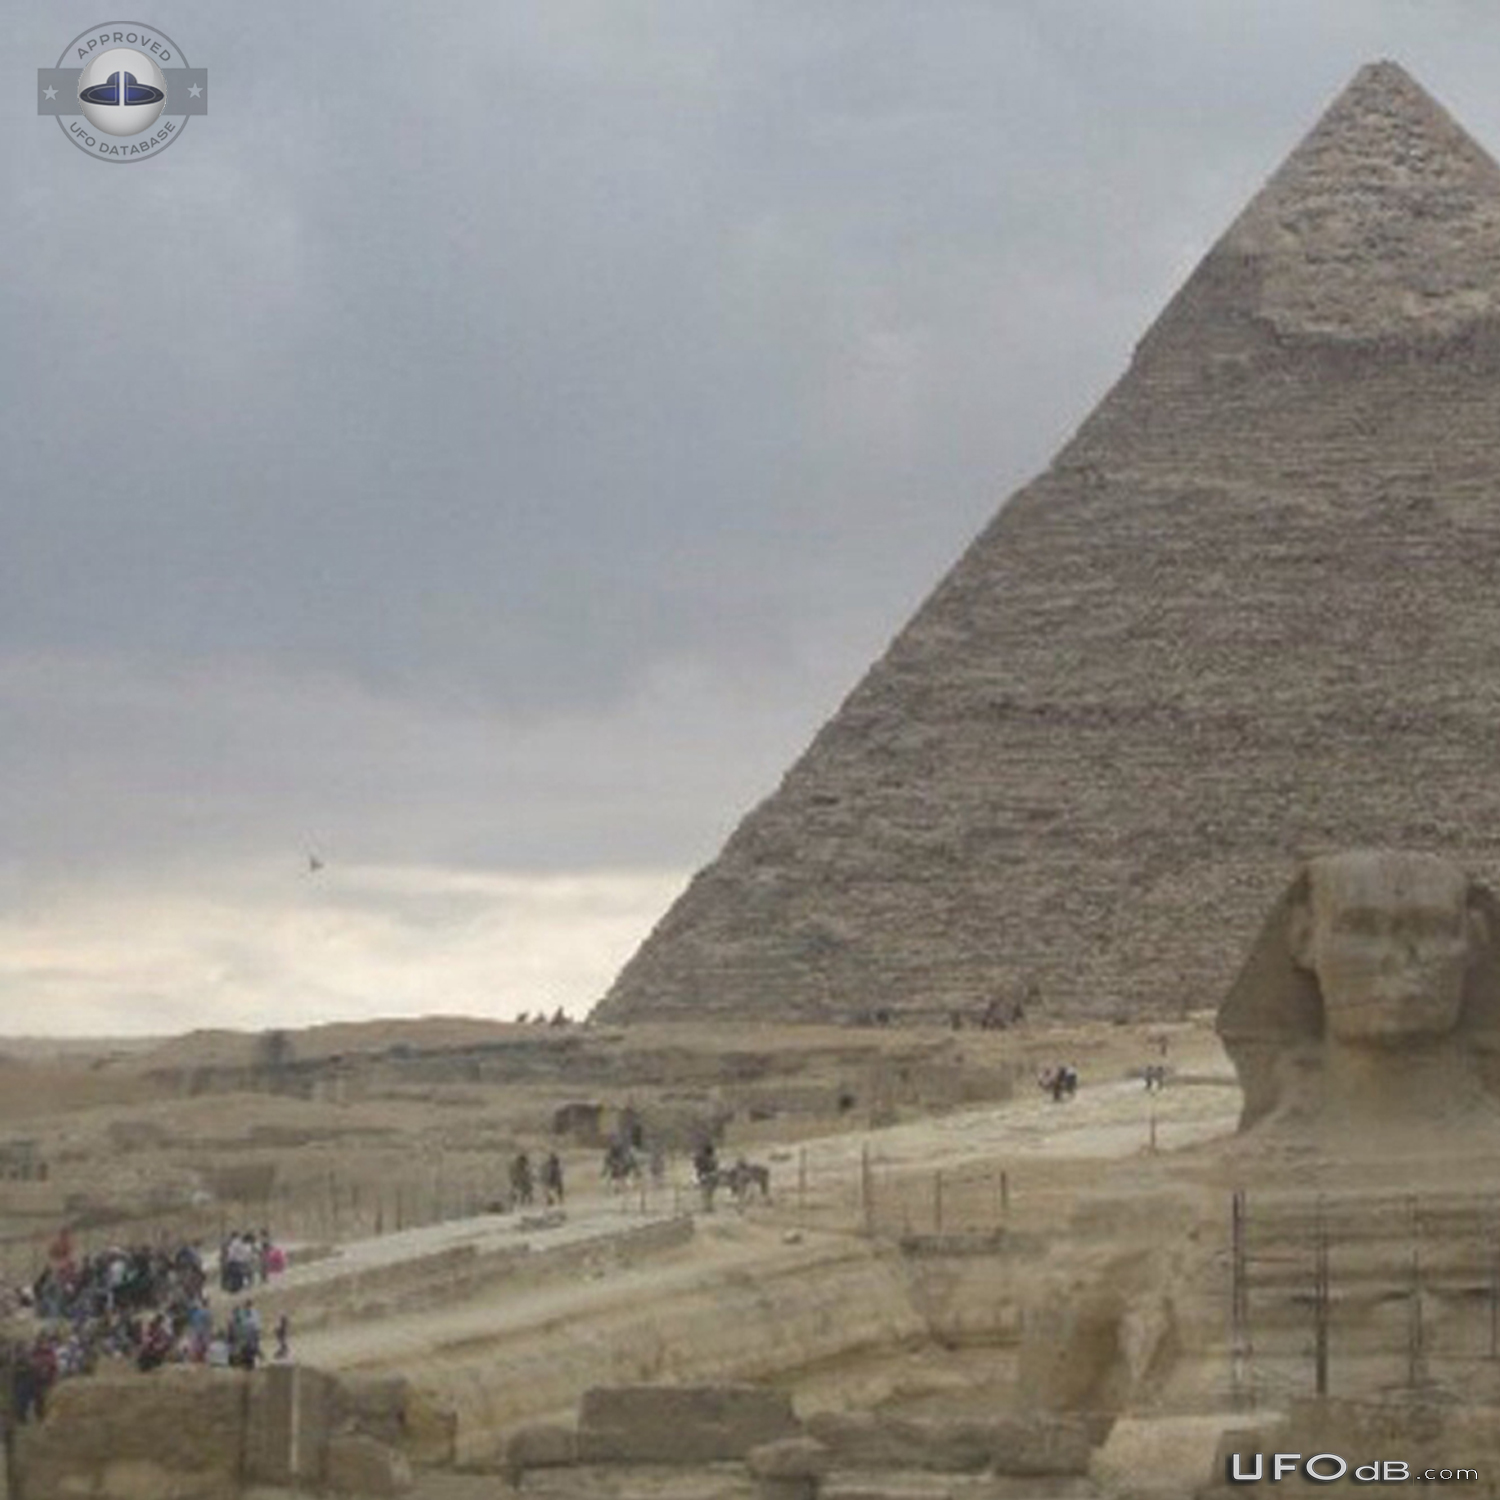 Picture reveal Triangular UFO on the left of a Pyramid in Egypt - 2011 UFO Picture #657-3